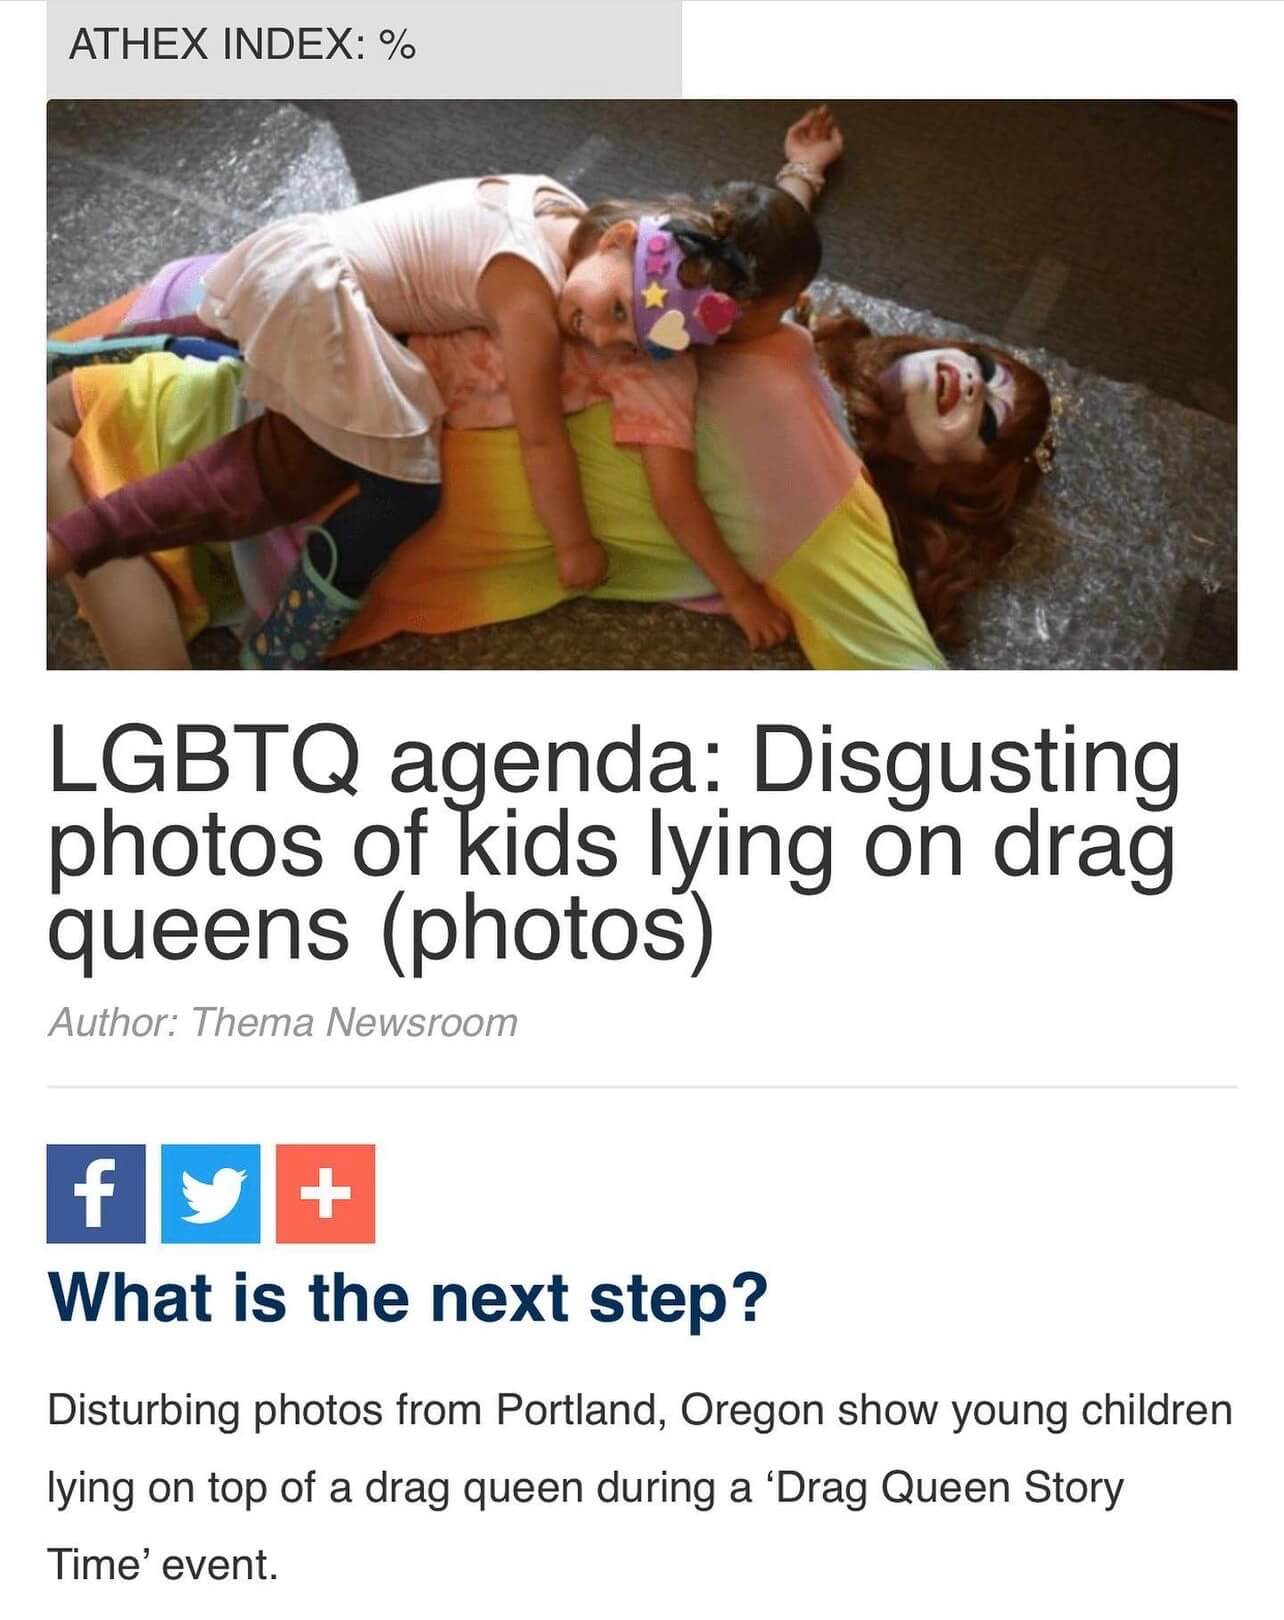 Screen shot of an online article from an unidentified publication. The headline reads, "LGBTQ agenda: Disgusting photos of kids lying on drag queens". The accompanying photo is the widely-shared image of a laughing Carla Rossi lying on her back on the floor of the library with two small children lying on top of her.